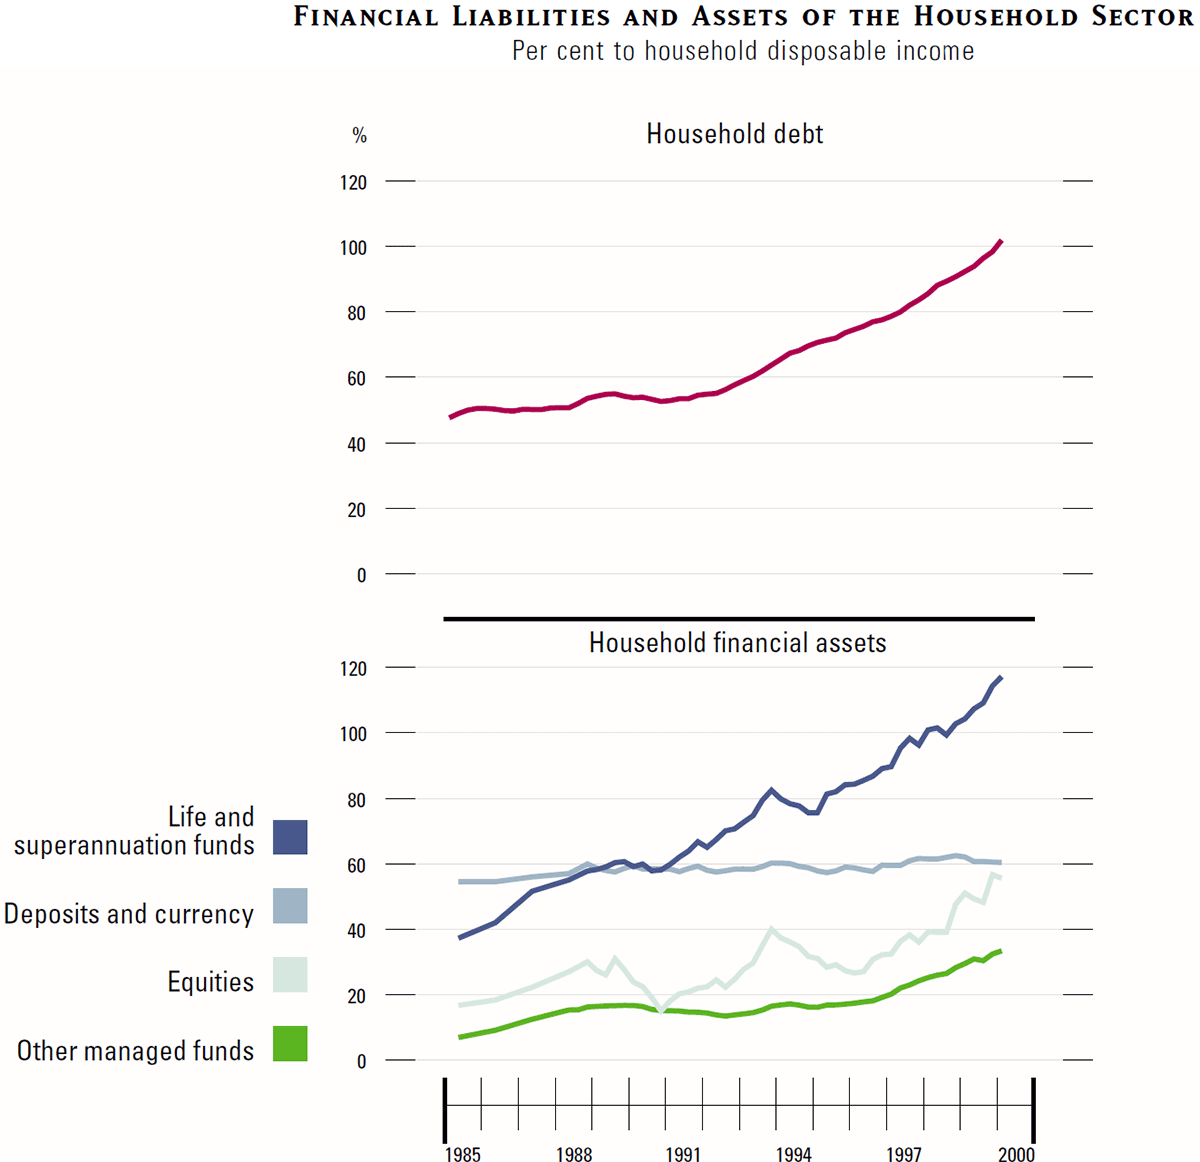 Graph showing Financial Liabilities and Assets of the Household Sector